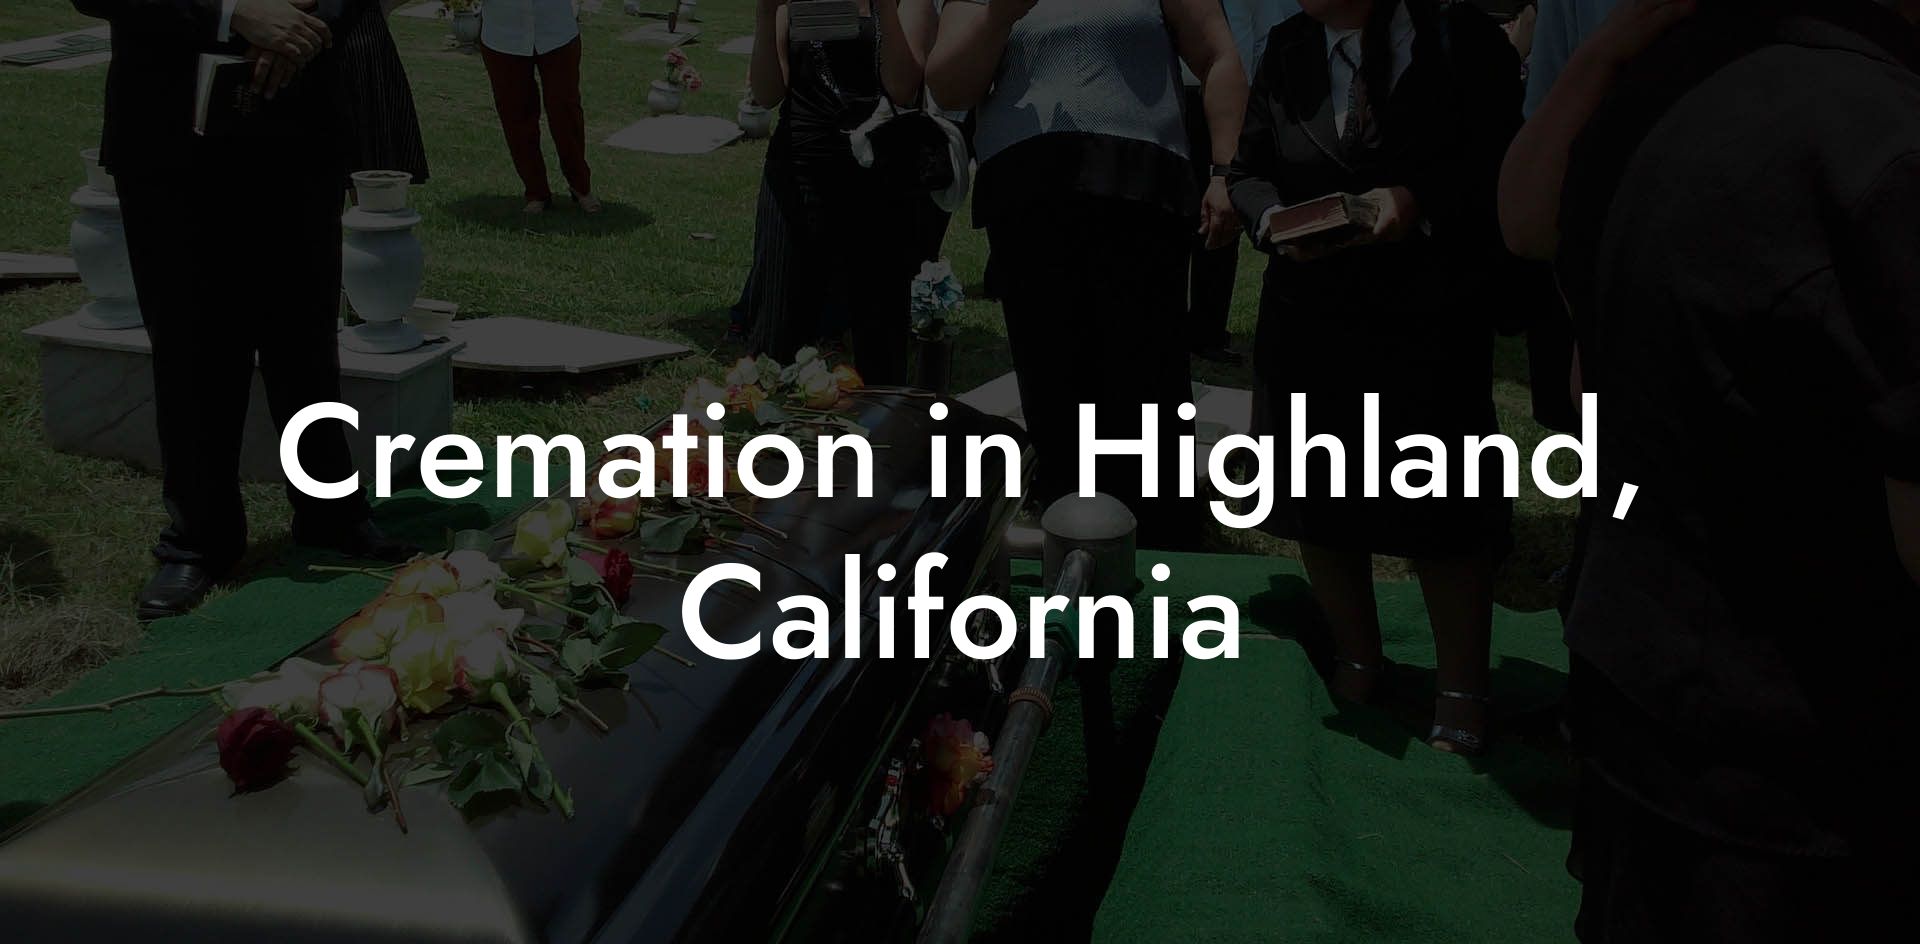 Cremation in Highland, California